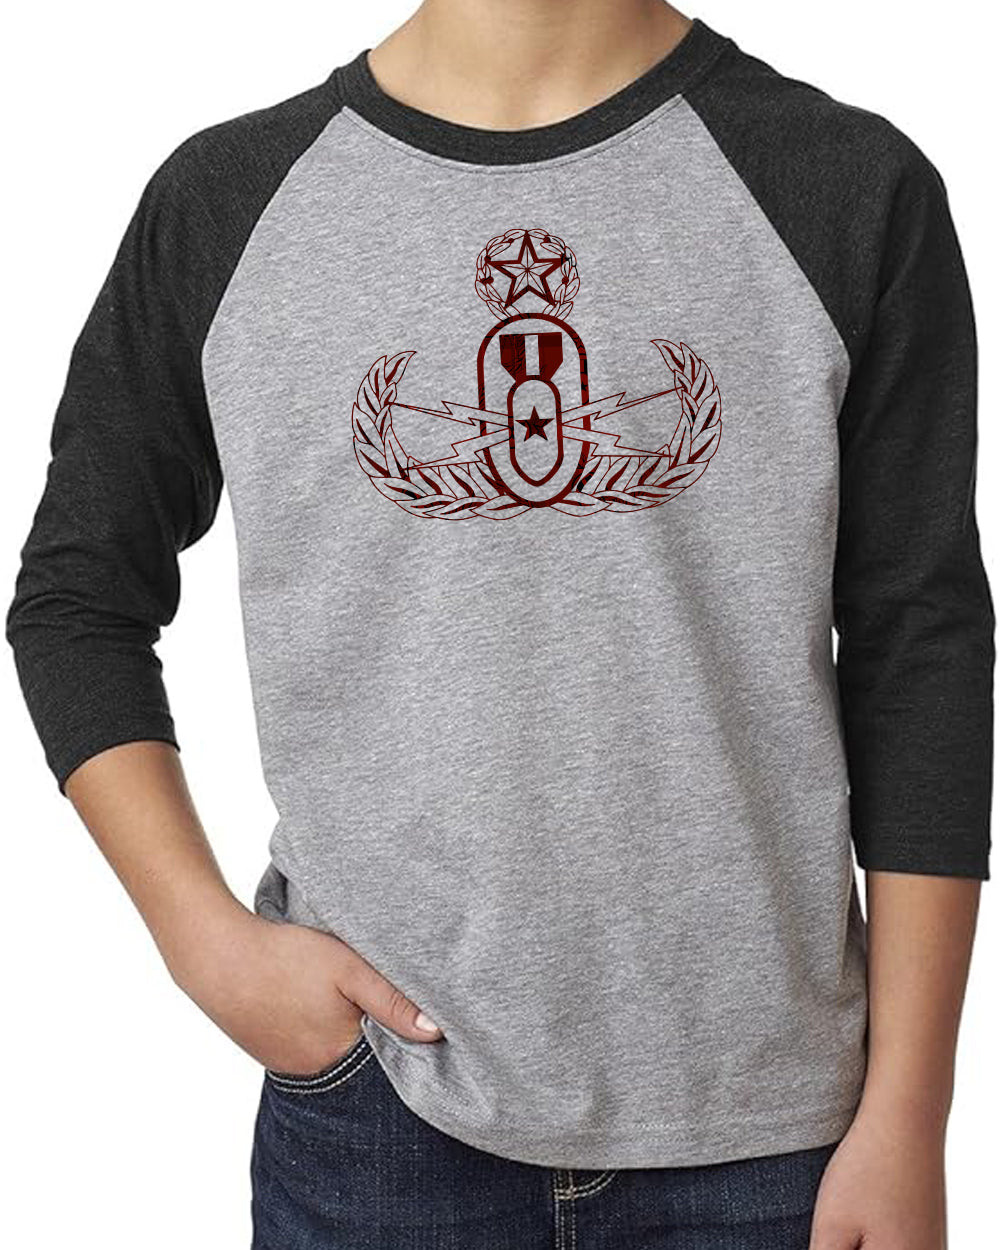 A child modeling a grey and black raglan  3/4 sleeve tee with a red and black plaid EOD Master Badge printed on the front